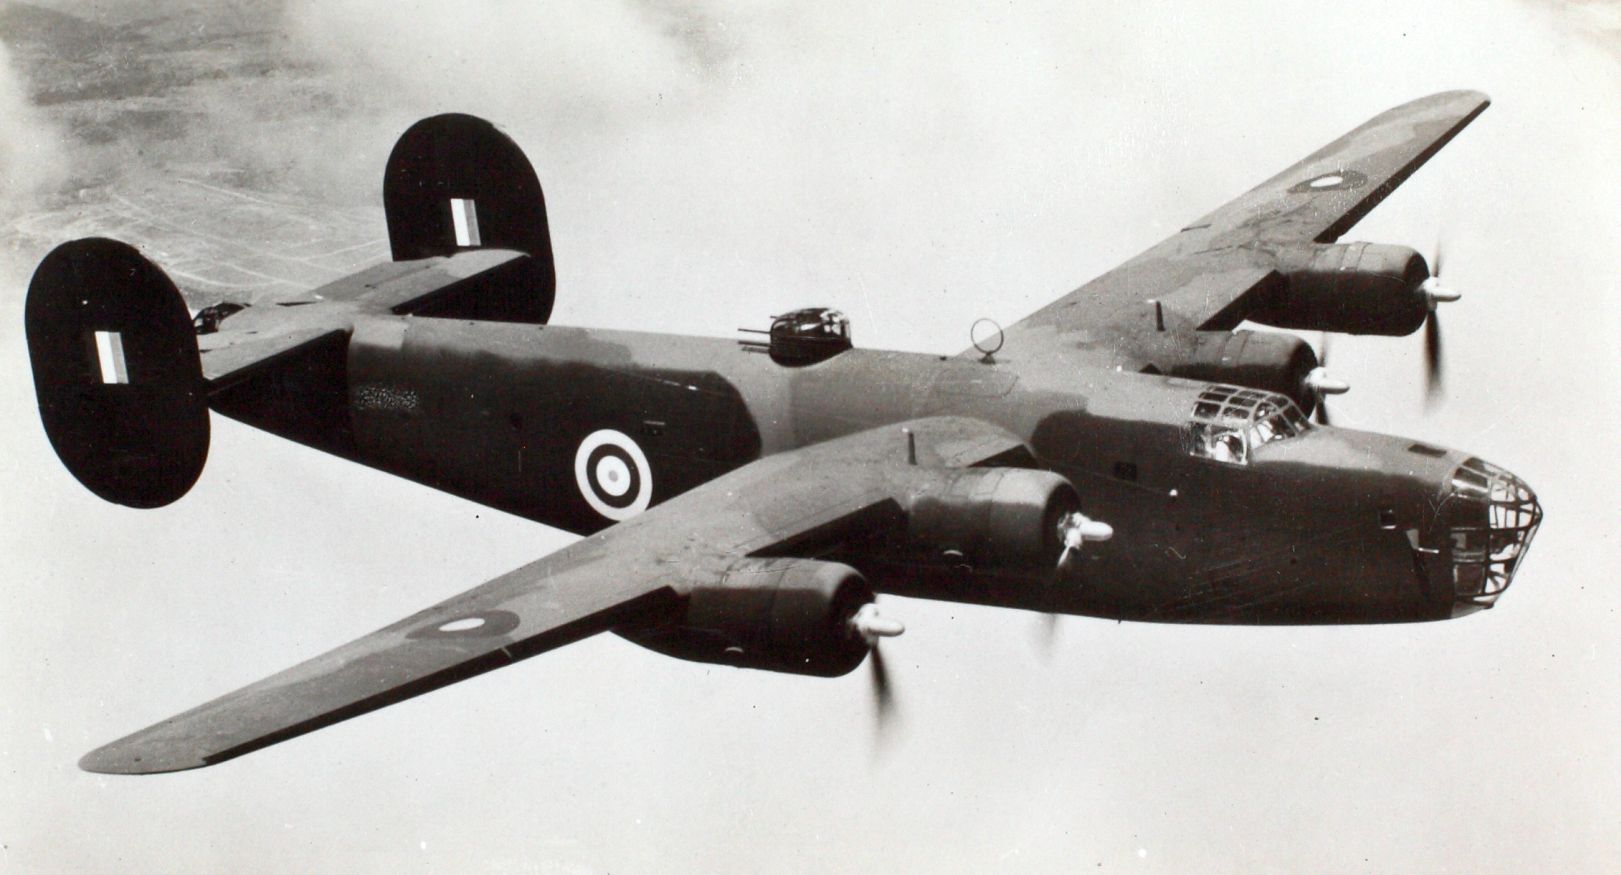 A black and white image of a Liberator bomber in flight.